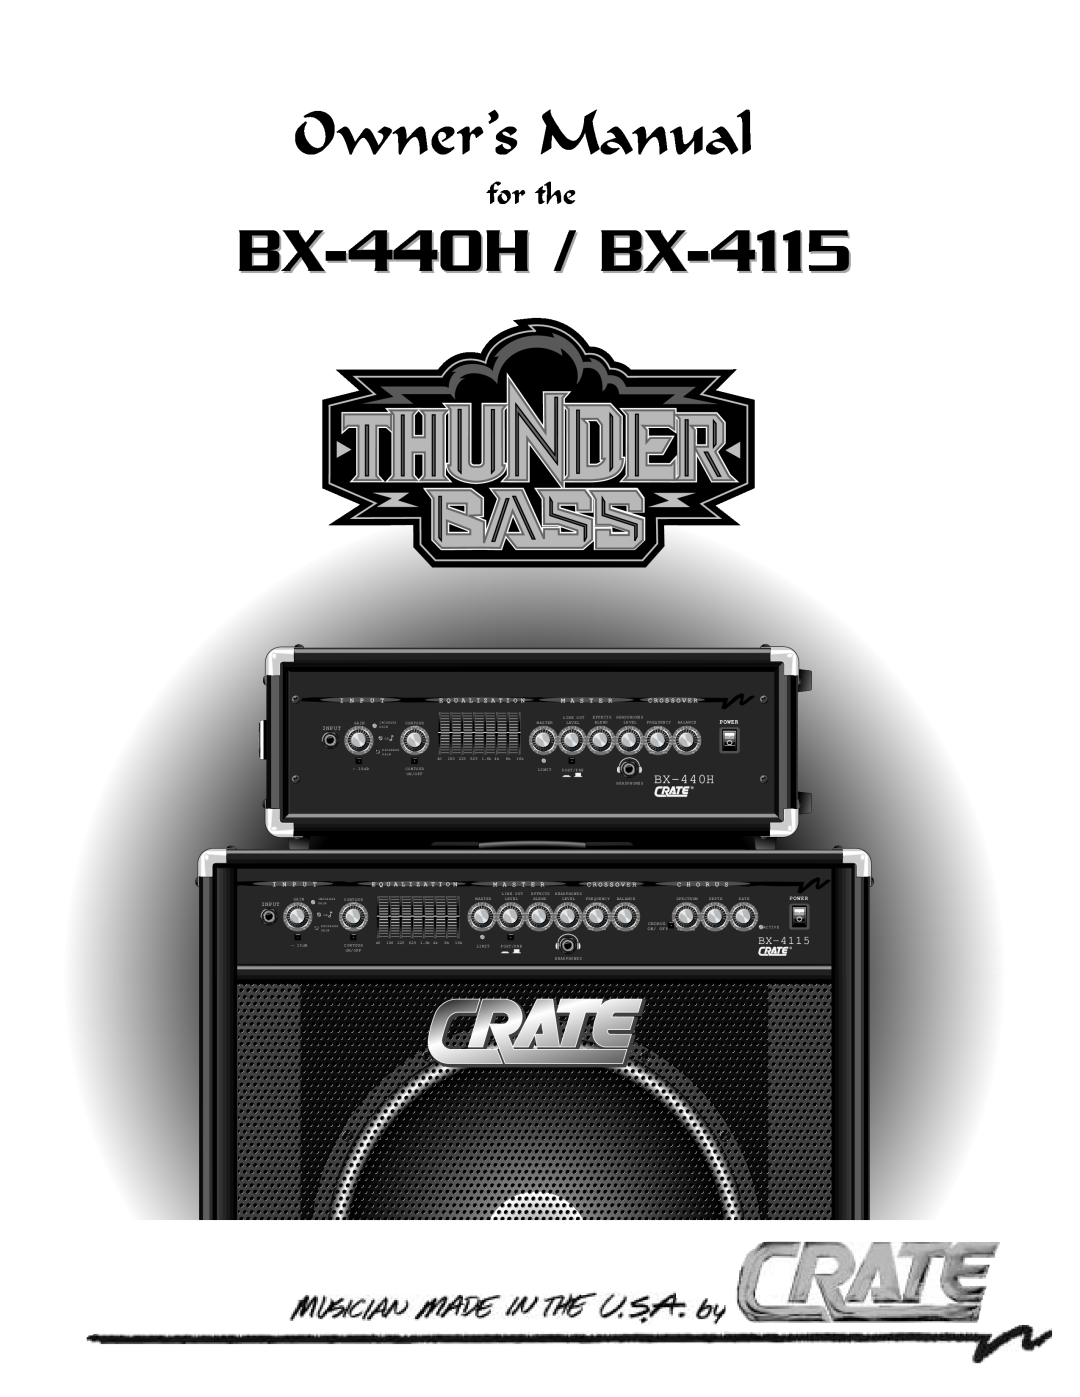 Crate Amplifiers owner manual BX-440H / BX-4115, for the, I N P U T, E Q U A L I Z A T I O N, M A S T E R, C H O R U S 